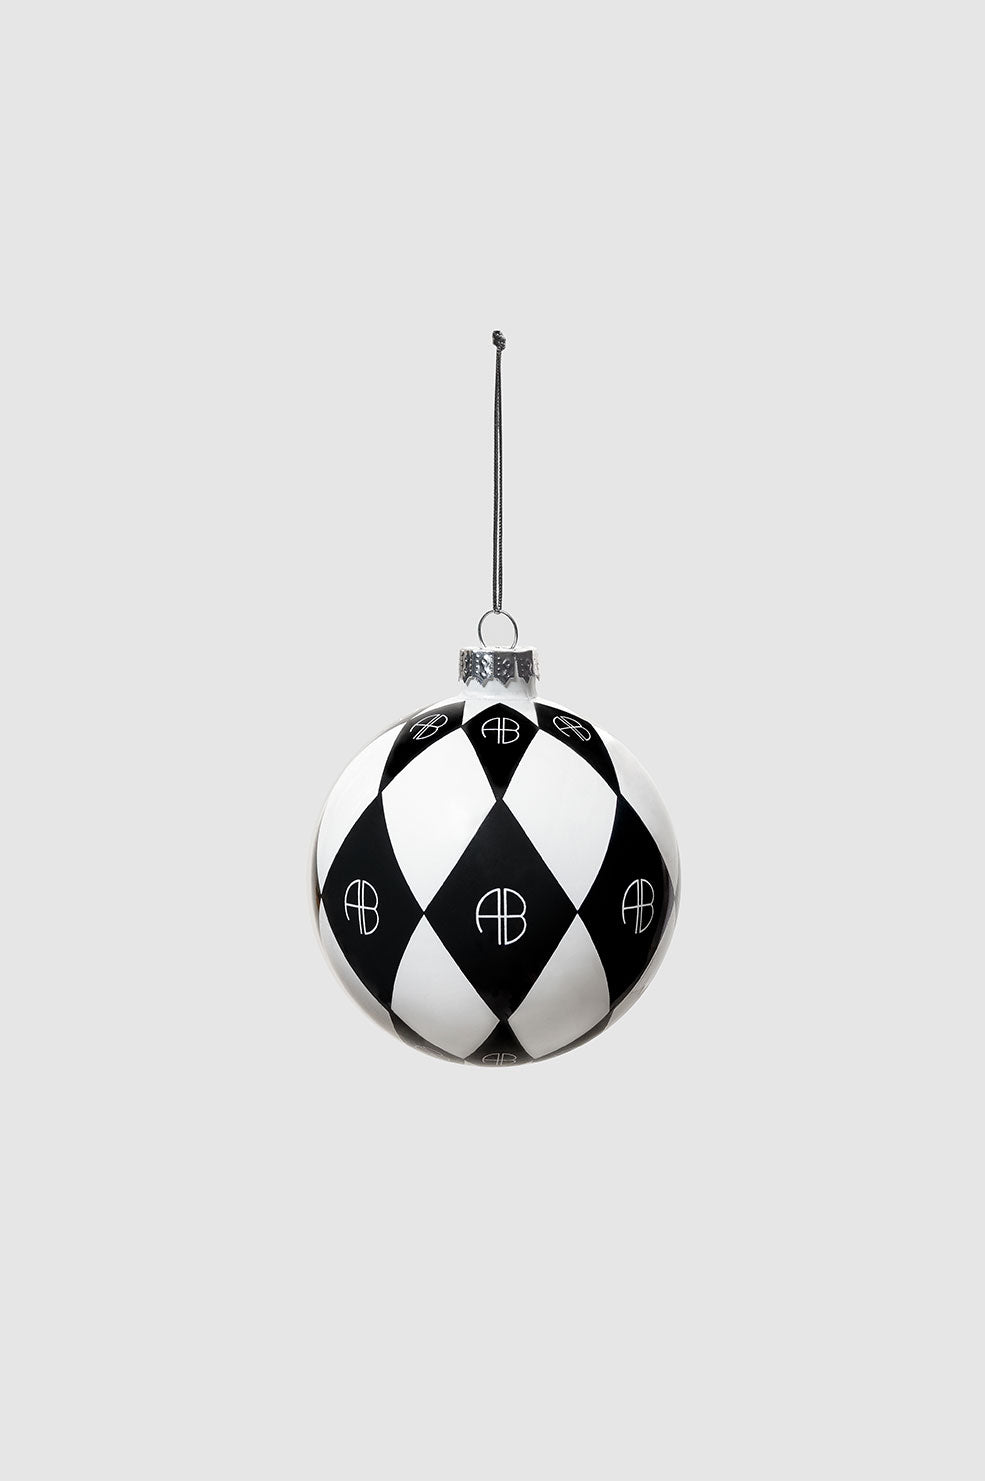 AB Ornament - Black And White - Front View